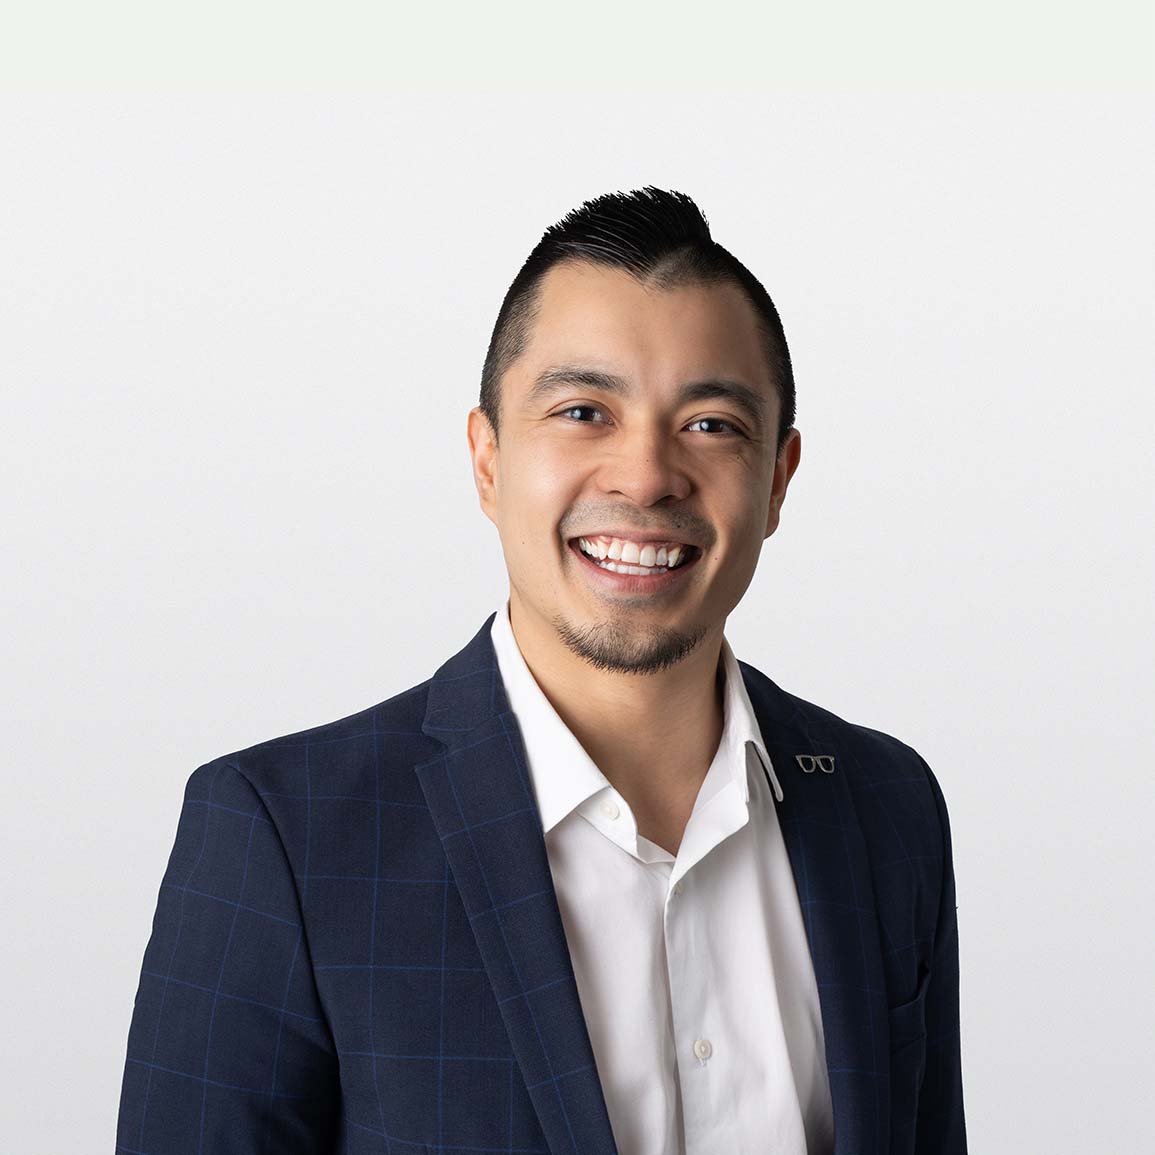 Image of Christopher Aguirre Financial Advisor  on white background